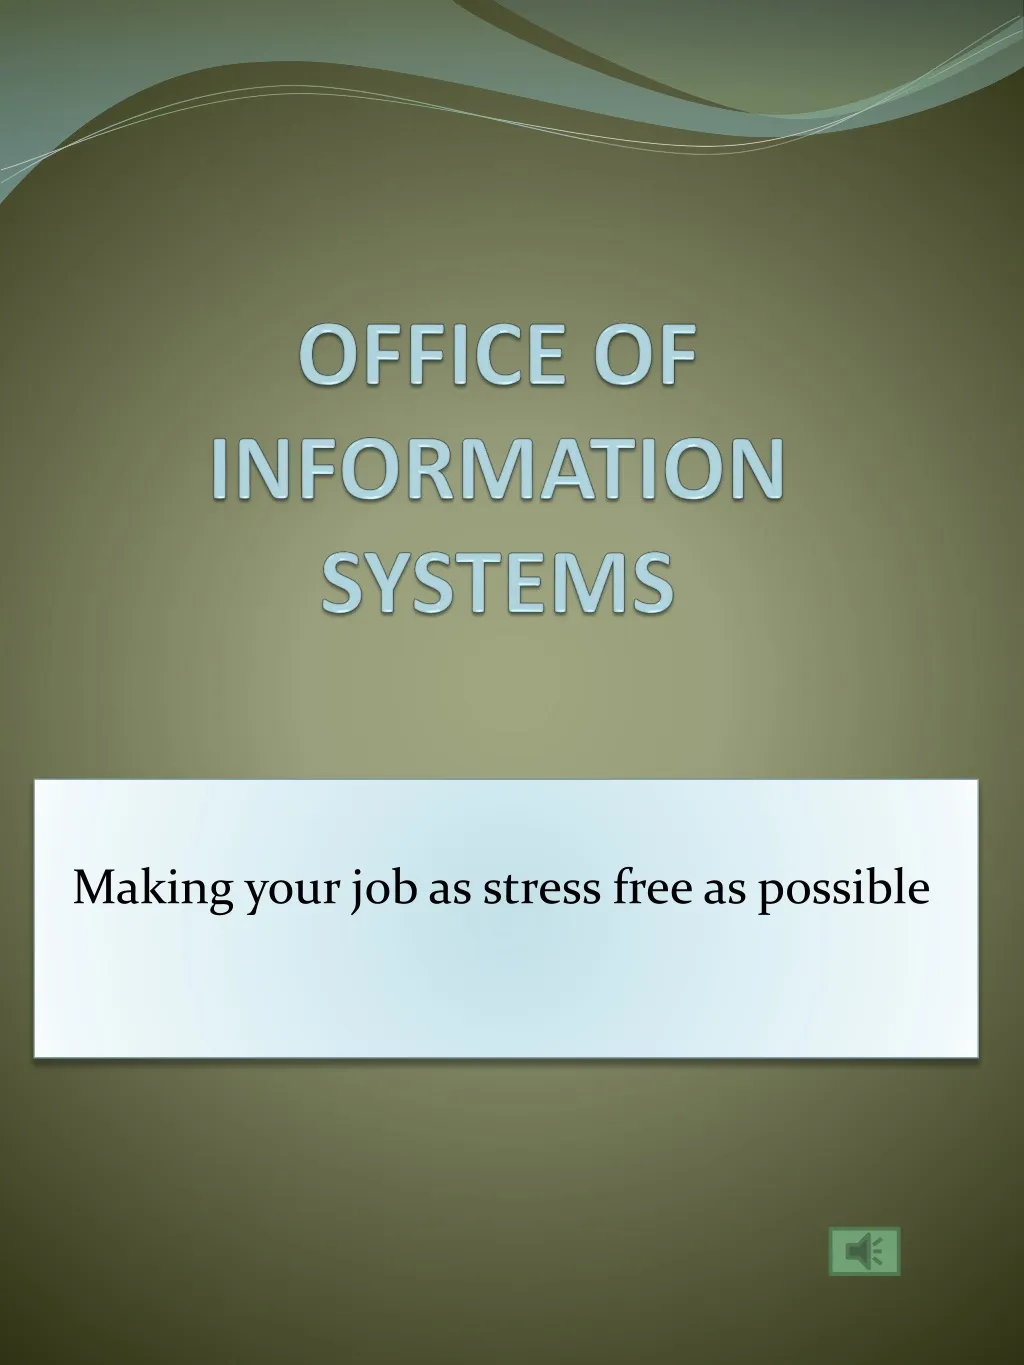 office of information systems